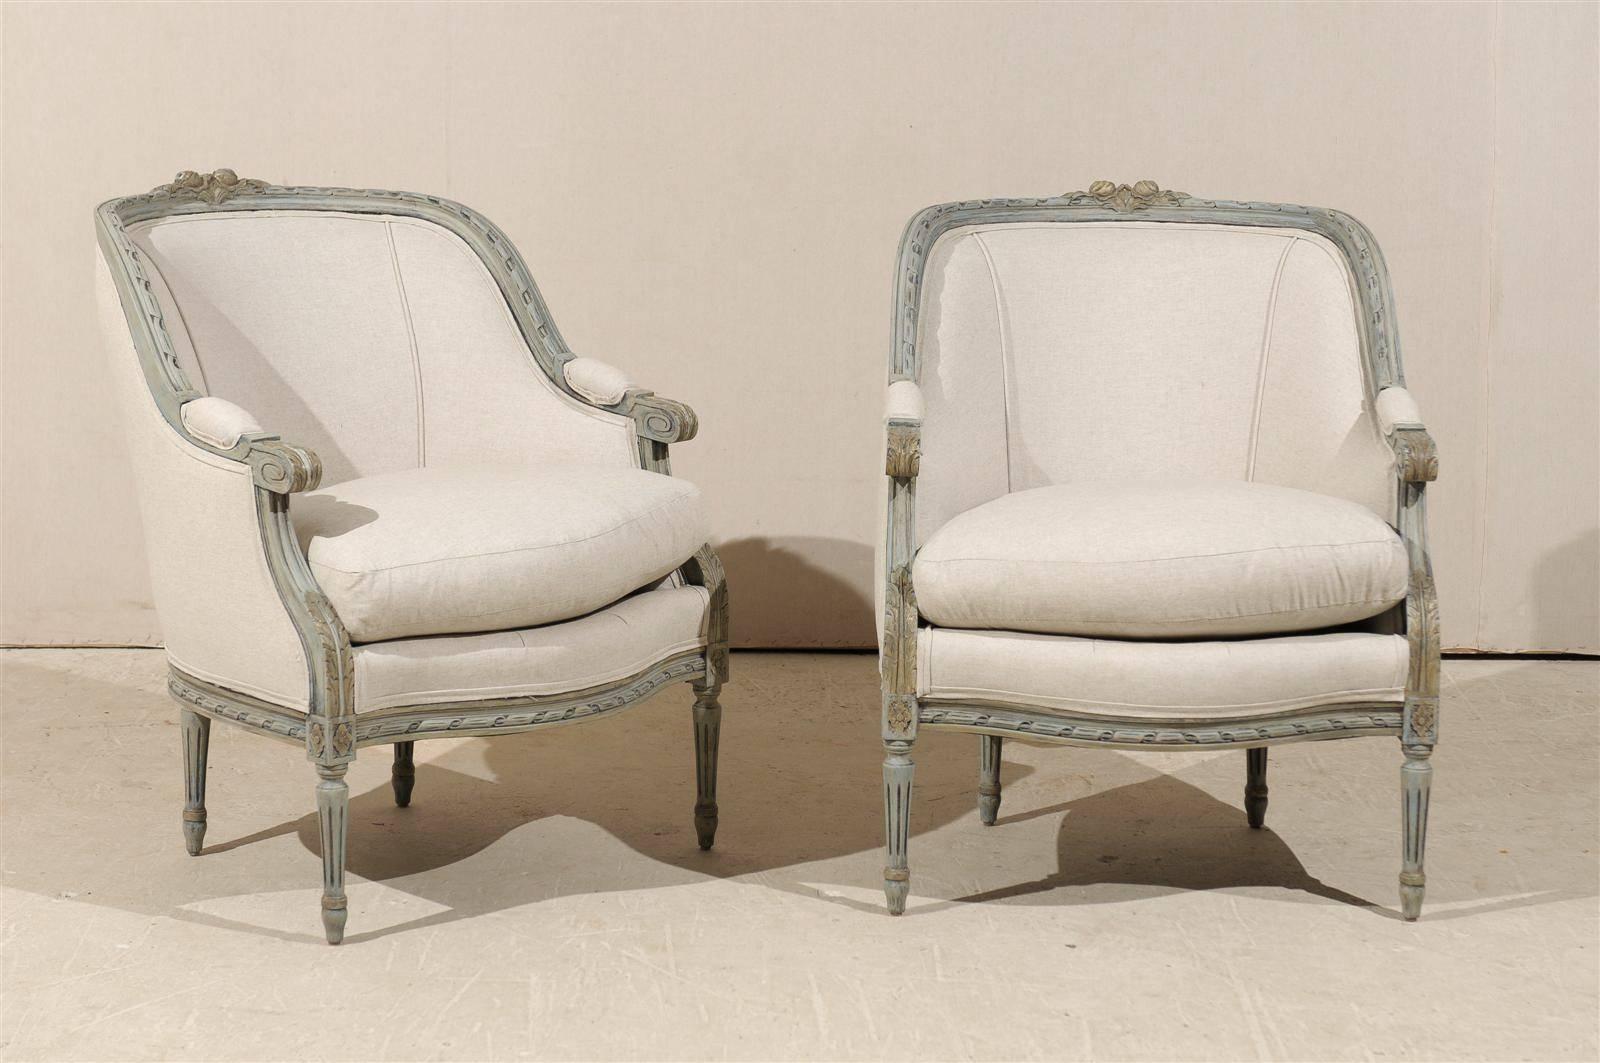 A pair of French Louis XVI style painted wood barrelback armchairs Reupholstered in Belgian linen with discreet gilt accents, scrolled and upholstered arms, fluted legs with rosettes on the knees, acanthus leaves and rose carvings on the top. Two